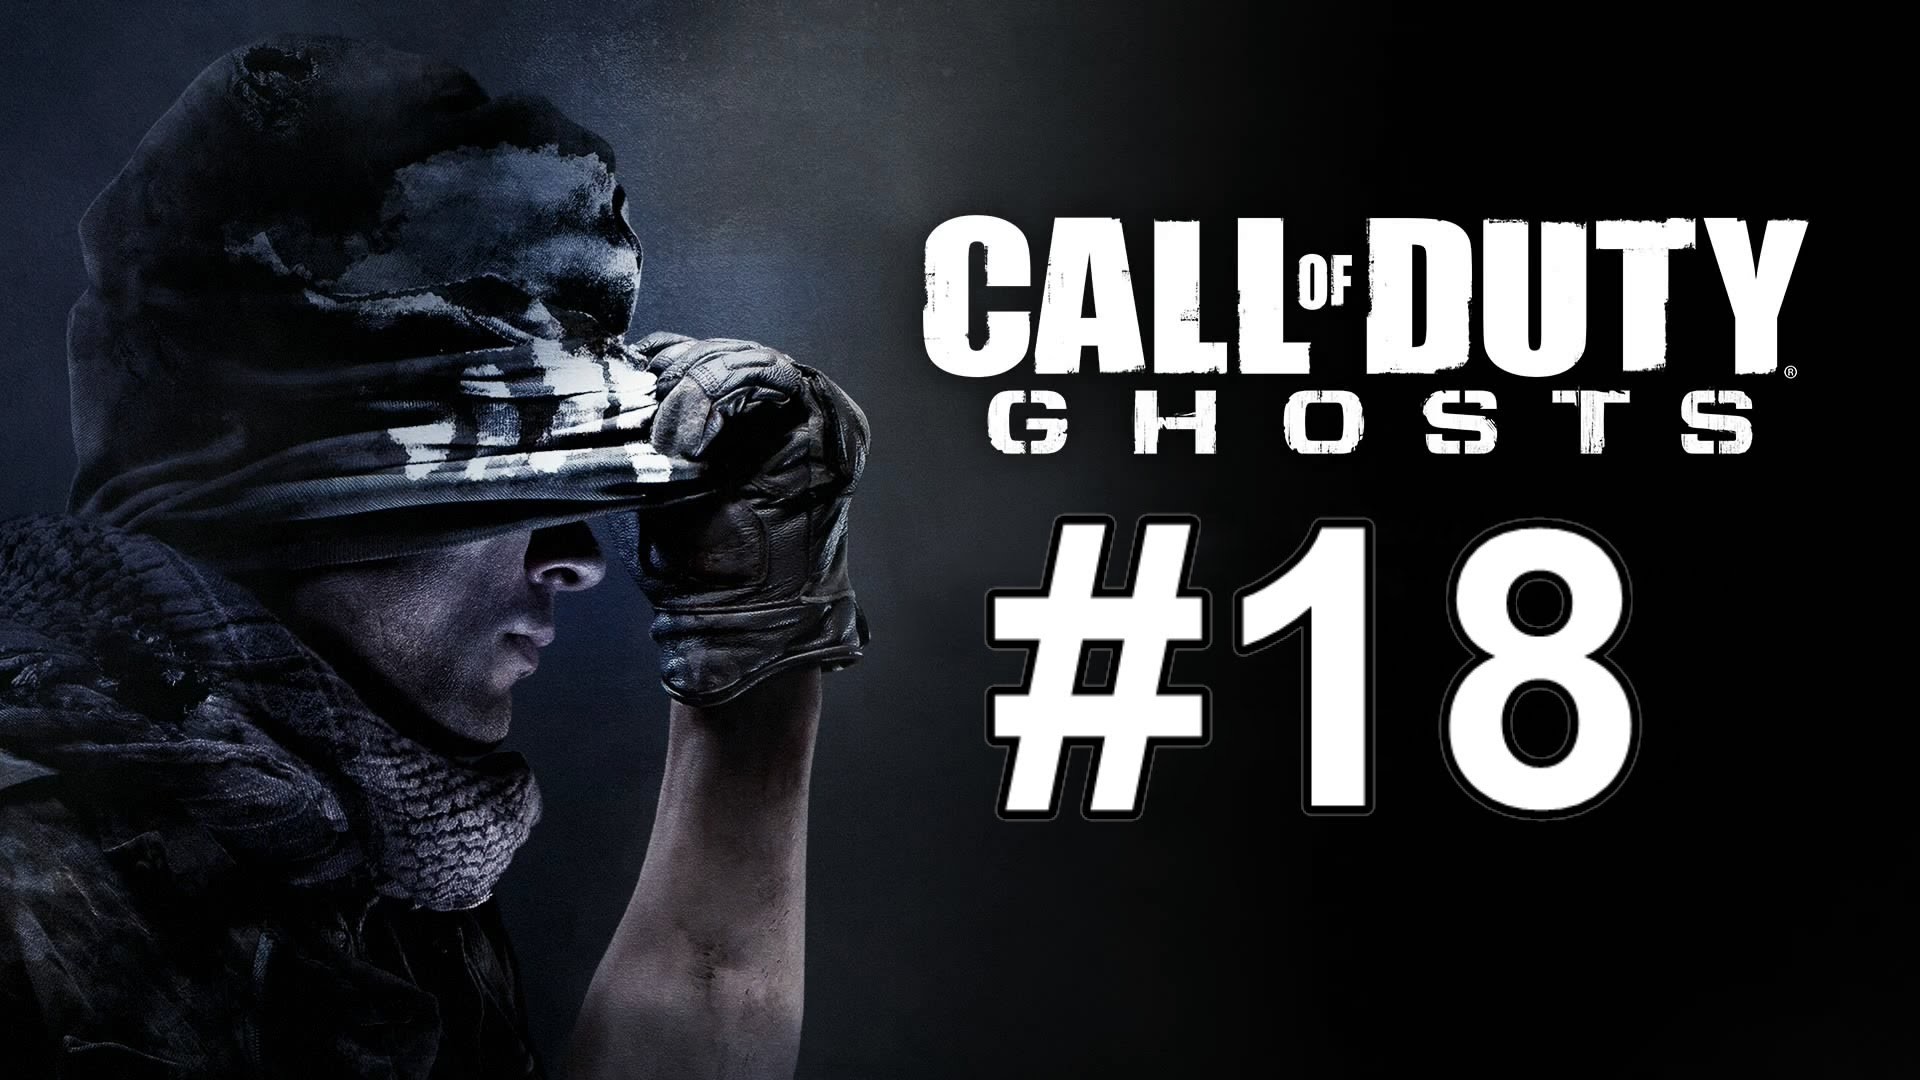 1920x1080 Call of Duty Ghosts - Walkthrough Part 18 Mission 18 The Ghost Killer  Ending Final Mission - YouTube